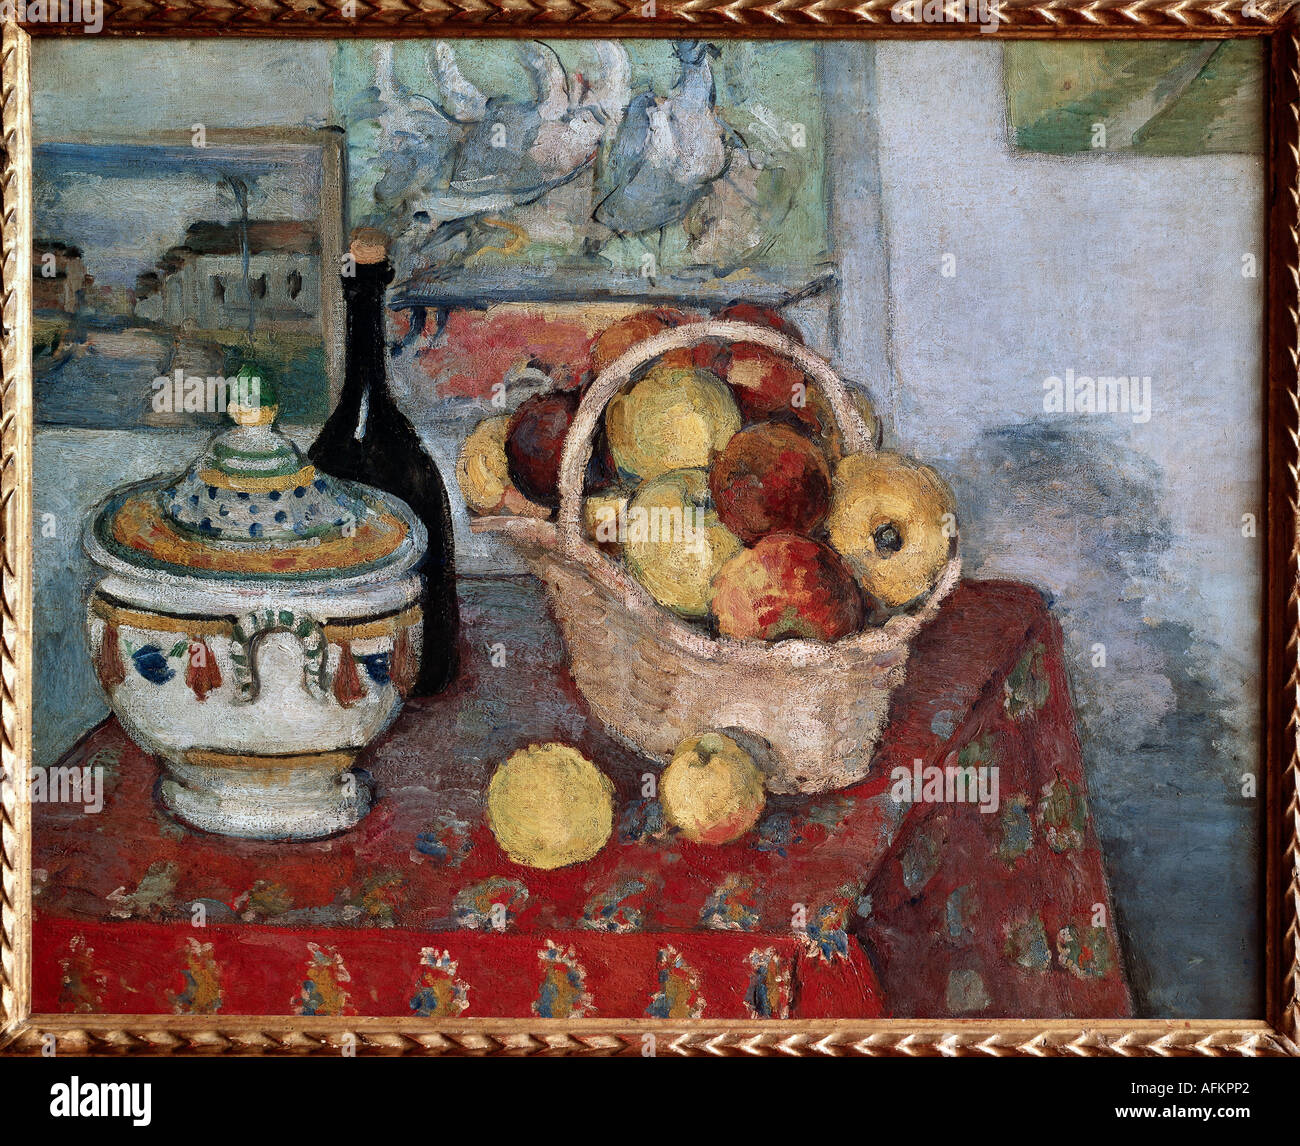 'fine arts, Cezanne, Paul (19.1.1839 - 22.10.1906), painting, 'Still life with Soup Tureen', circa 1877, oil on canvas, Musee Stock Photo